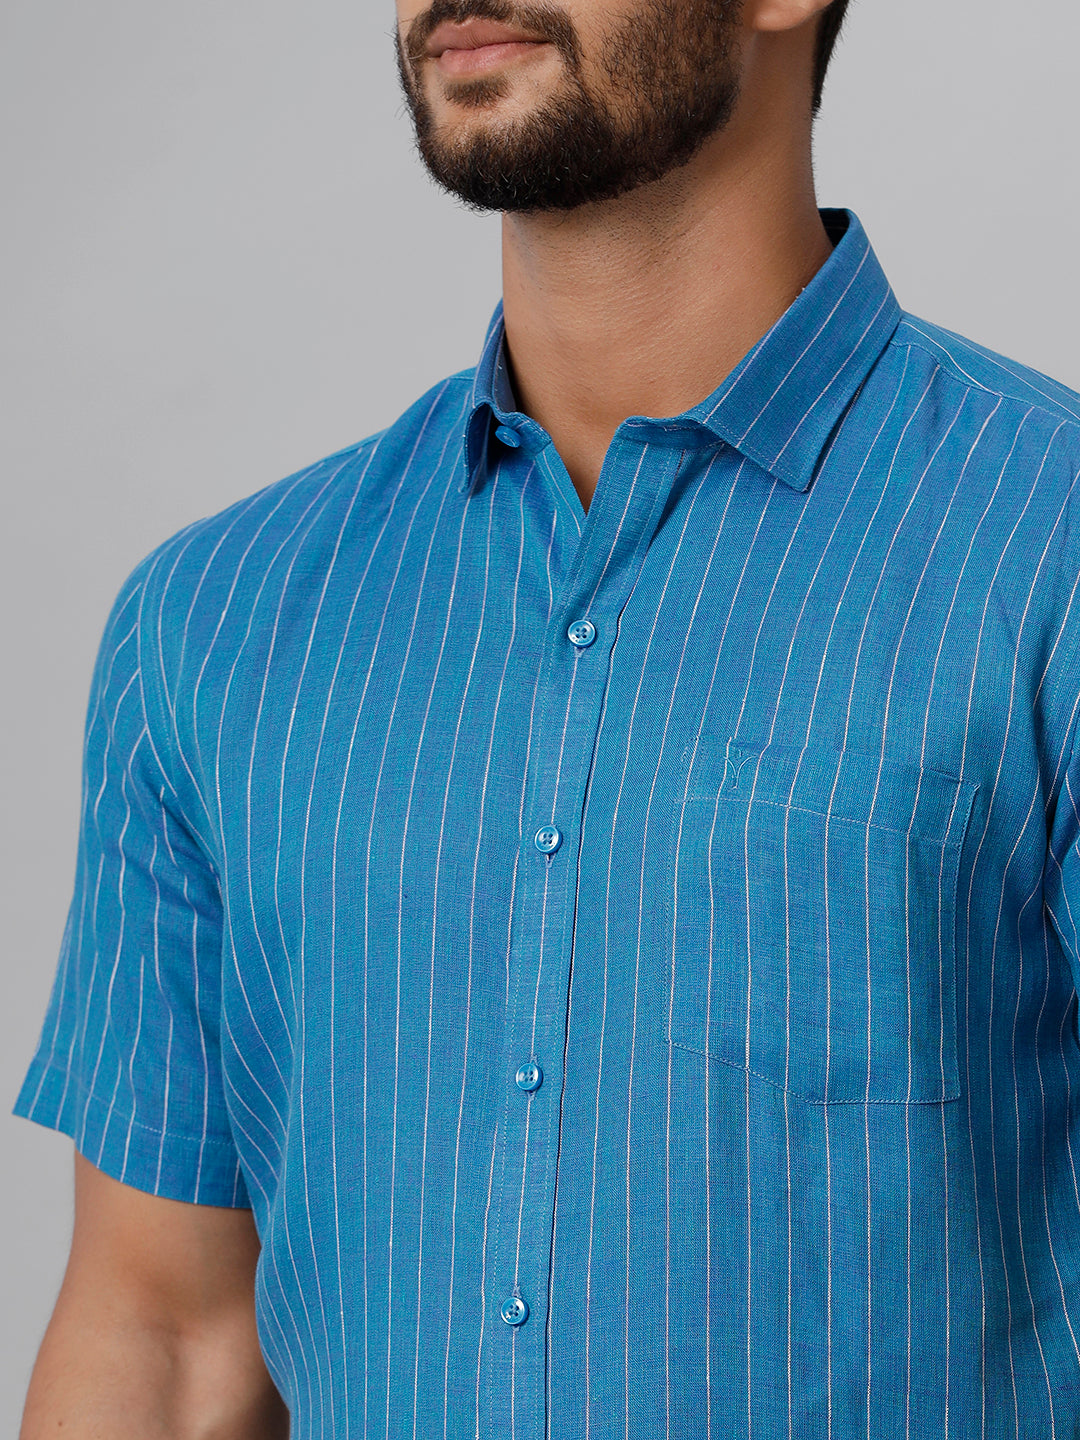 Mens Pure Linen Striped Half Sleeves Blue Shirt LS11-Zoom view